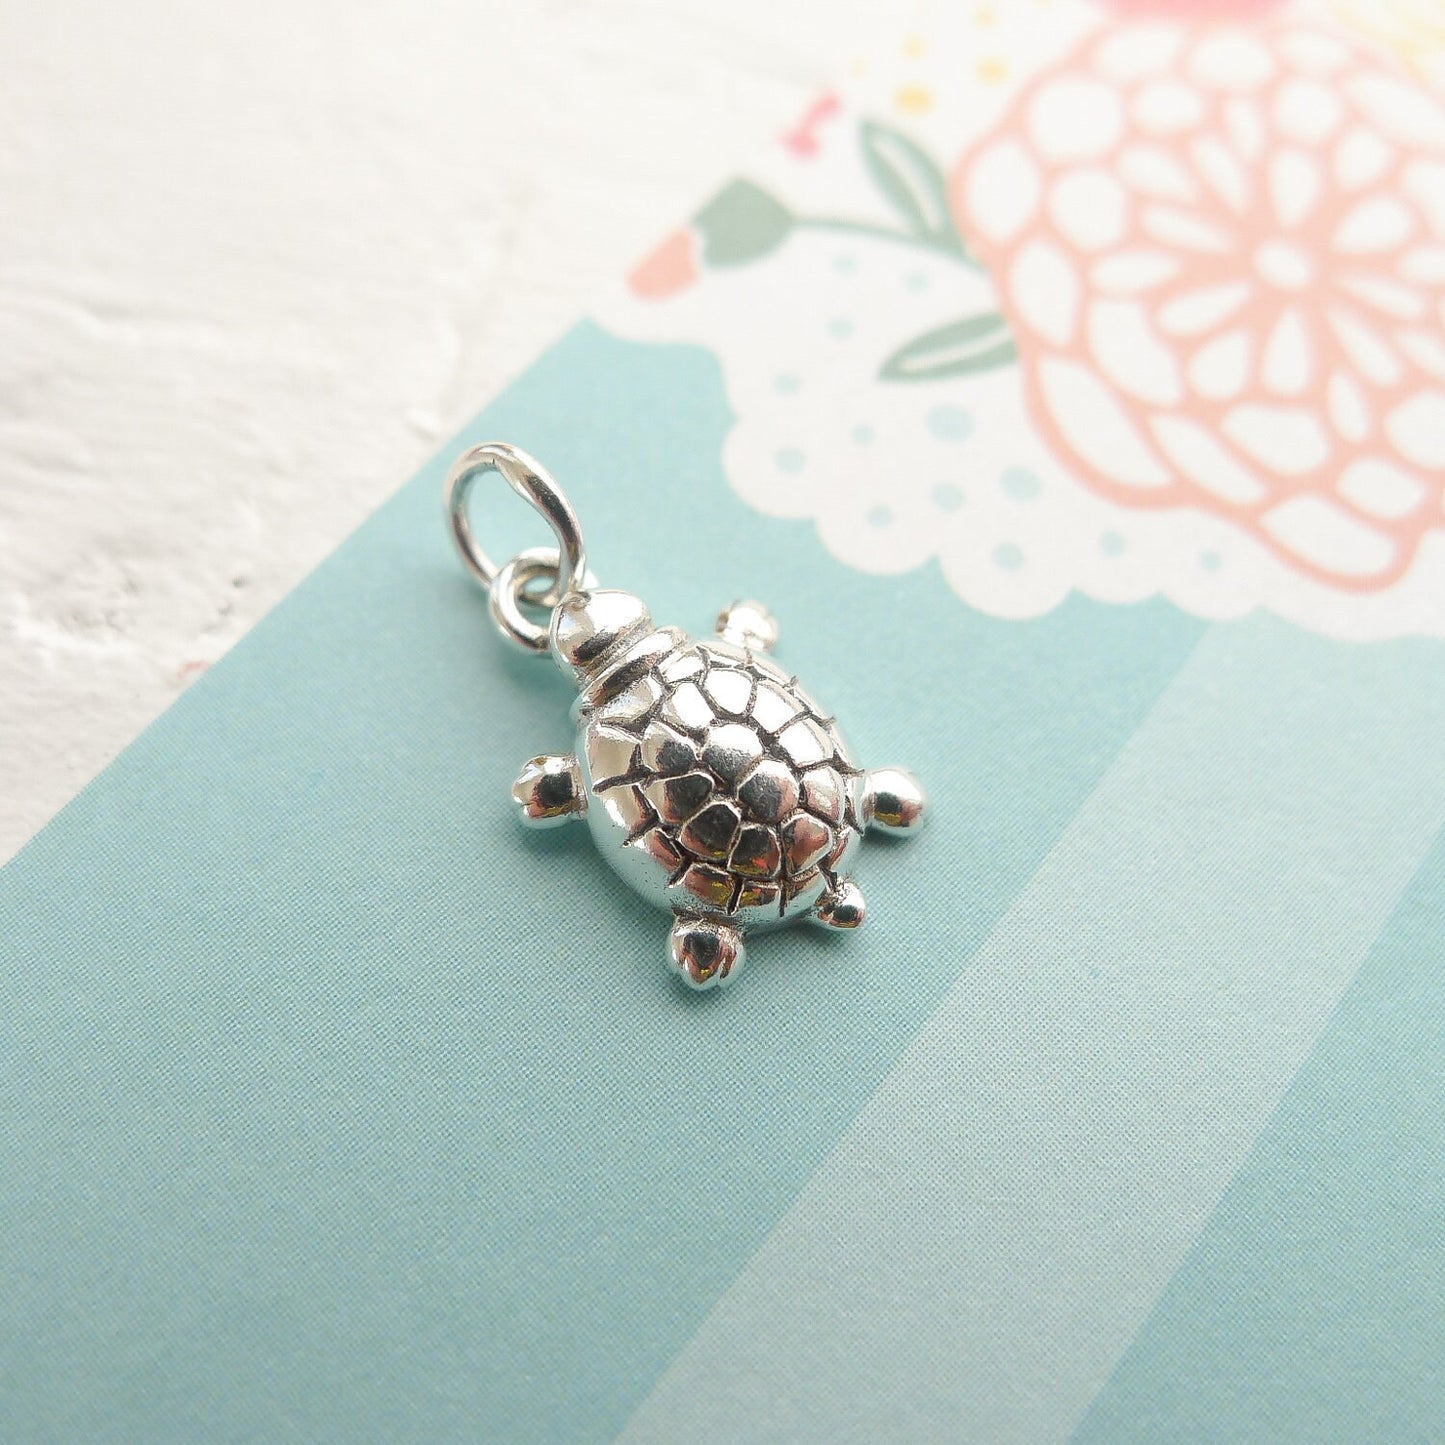 Turtle Charm Sterling Silver Seaturtle Pendant